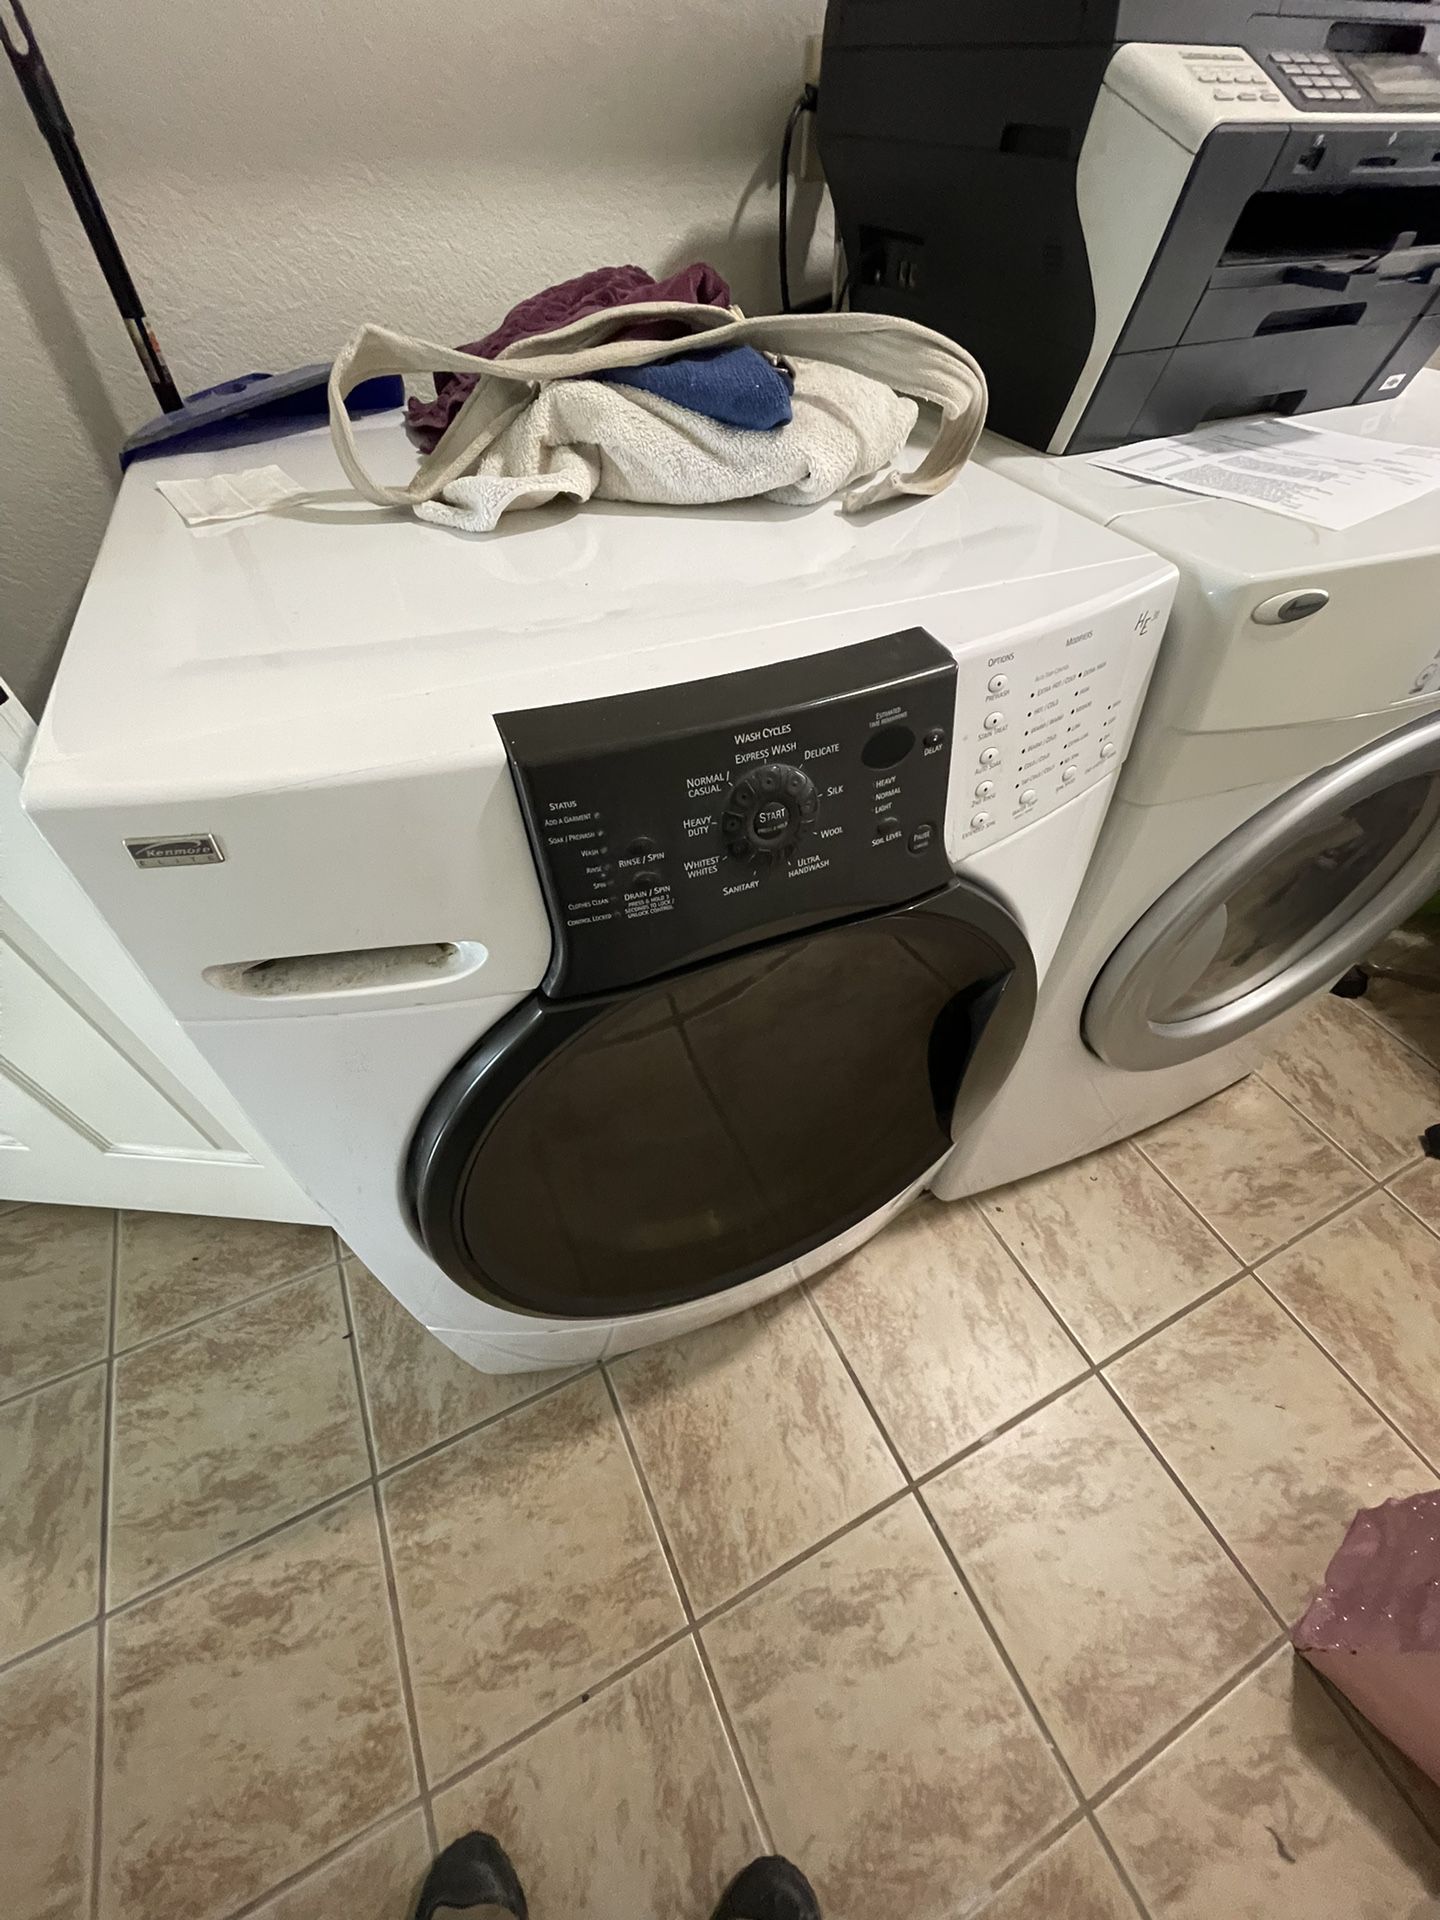 Washer KENMORE ELITE HE3t 4 0 cu ft front load king size capacity